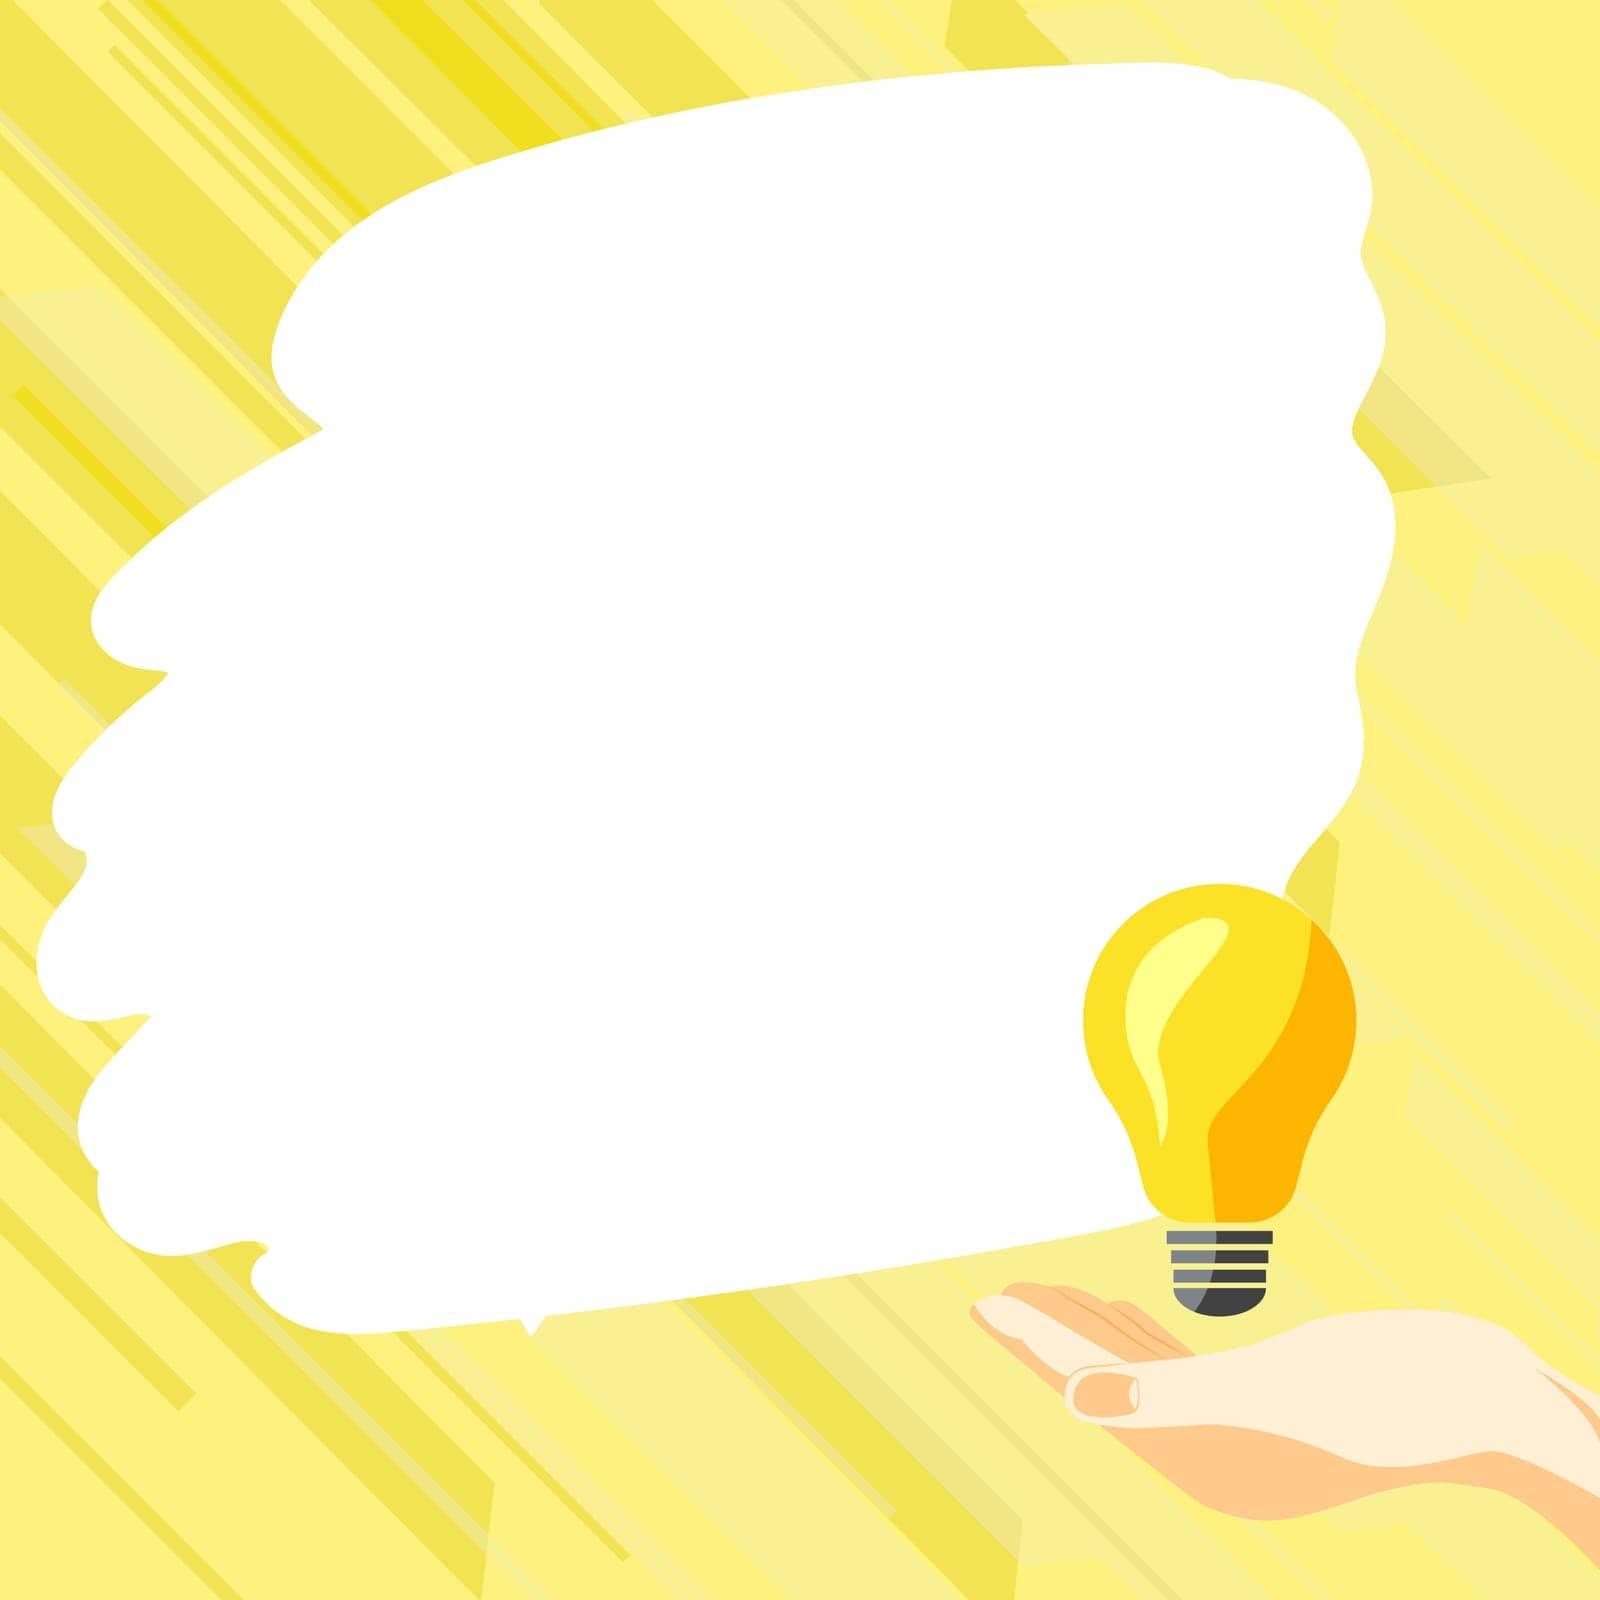 Drawn Hand holding yellow bulb. Important message written on white textholder. Main information in cropped speech bubble over colored comic background. by nialowwa